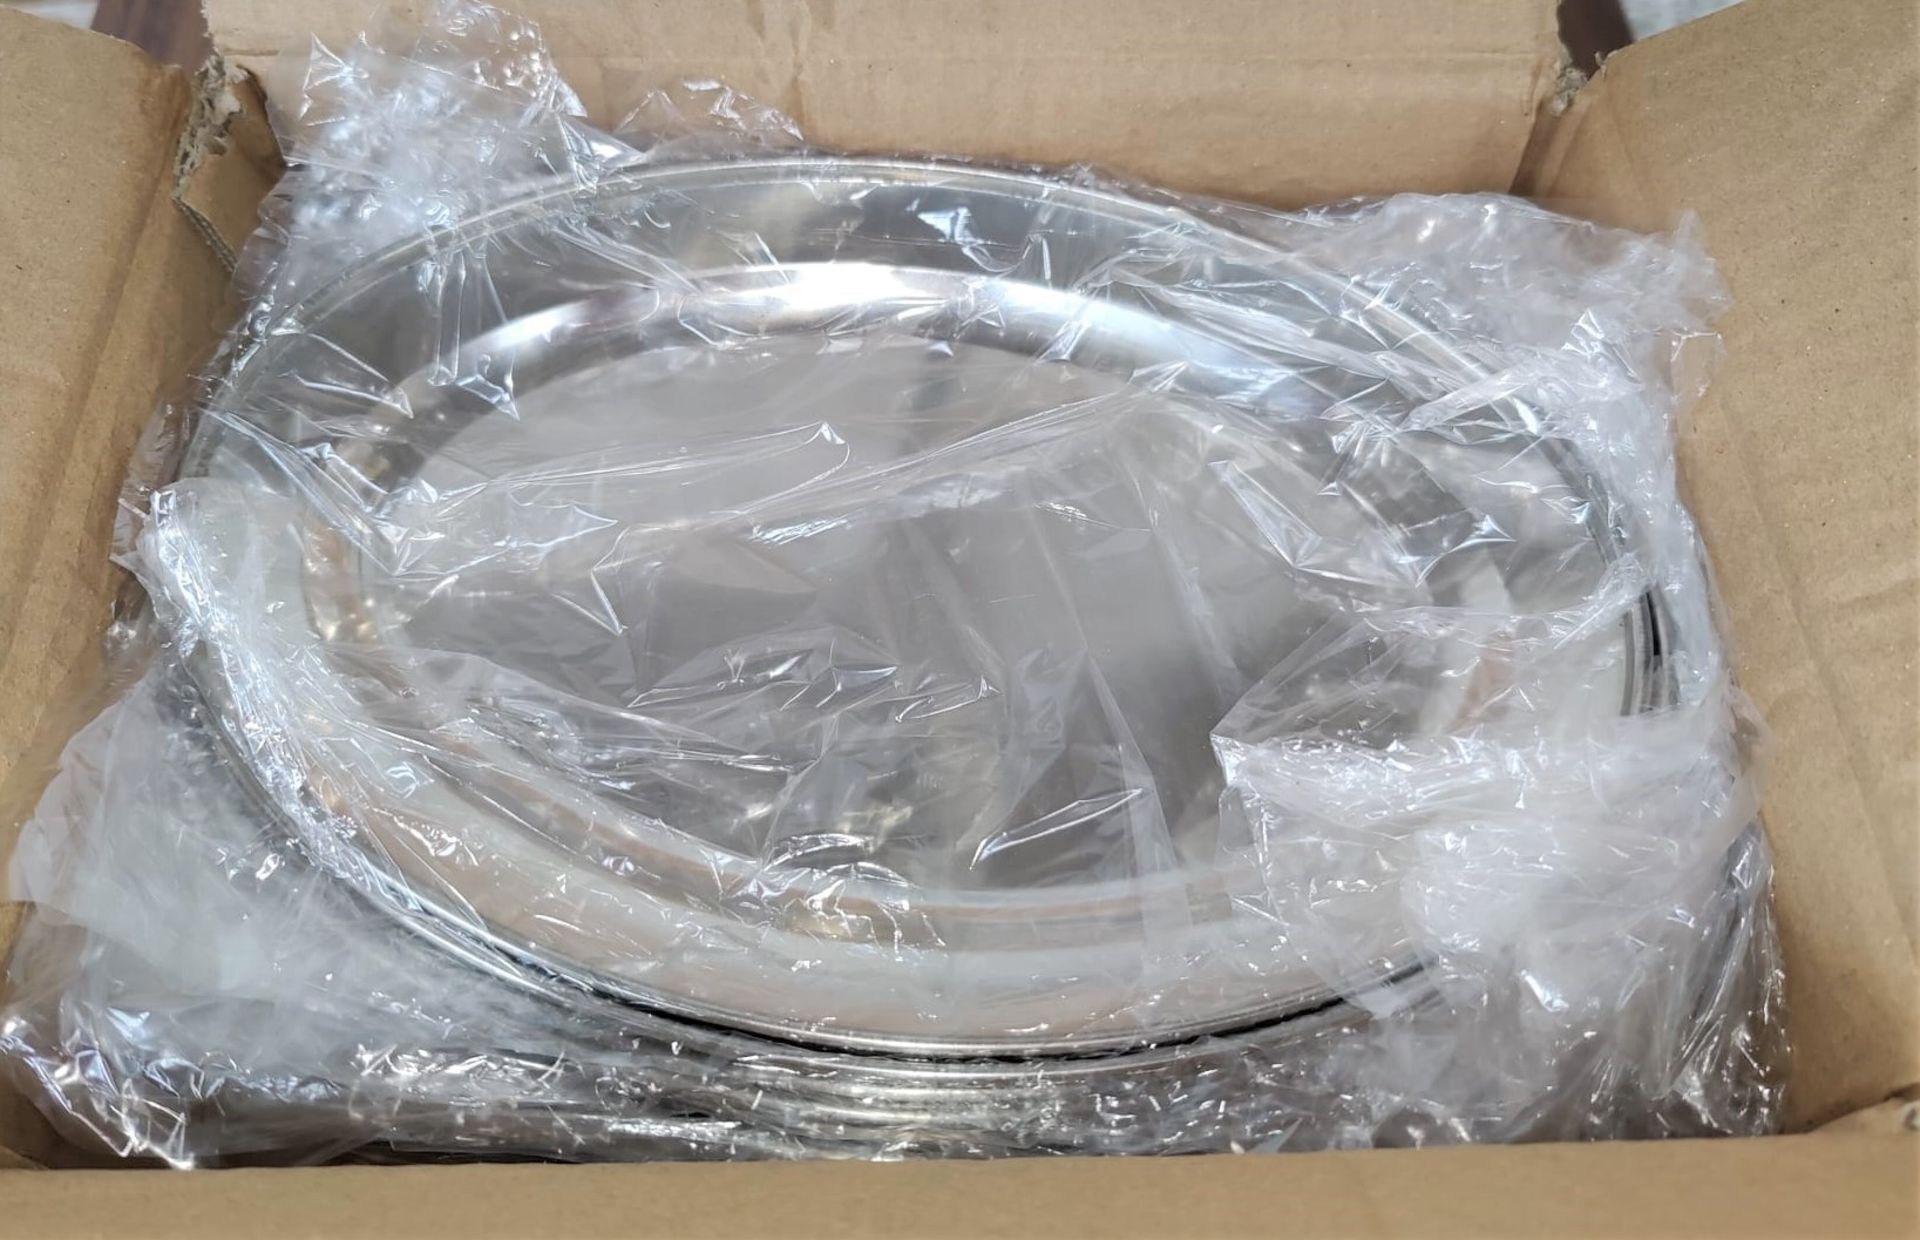 18 x Stainless Steel Small Oval Service Trays - Size: 255mm x 180mm - Brand New Boxed Stock RRP £90 - Image 4 of 8